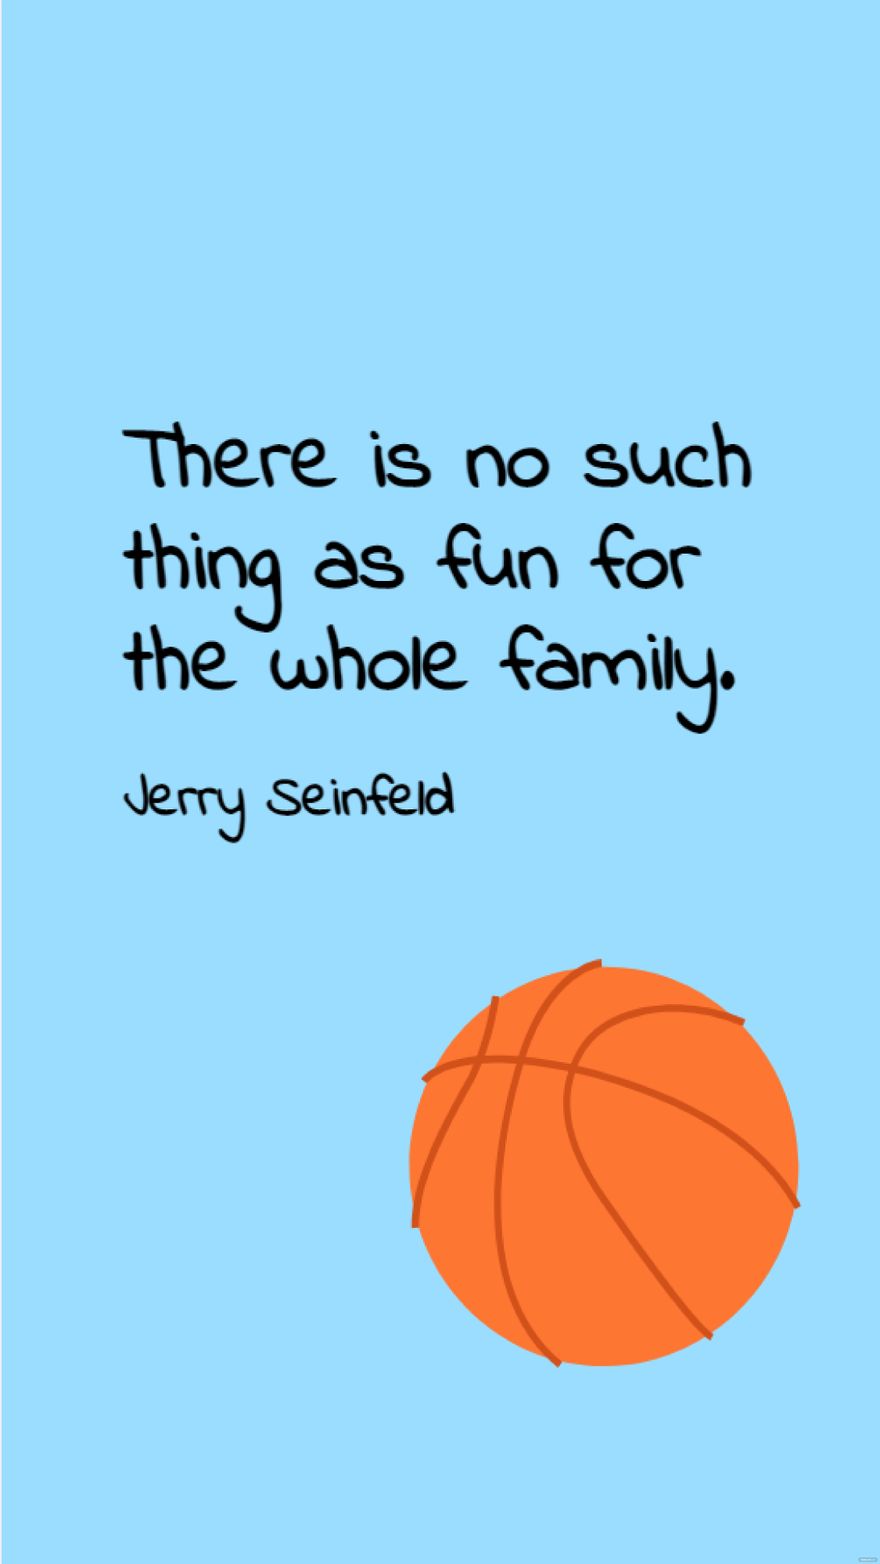 Free Jerry Seinfeld - There is no such thing as fun for the whole family.